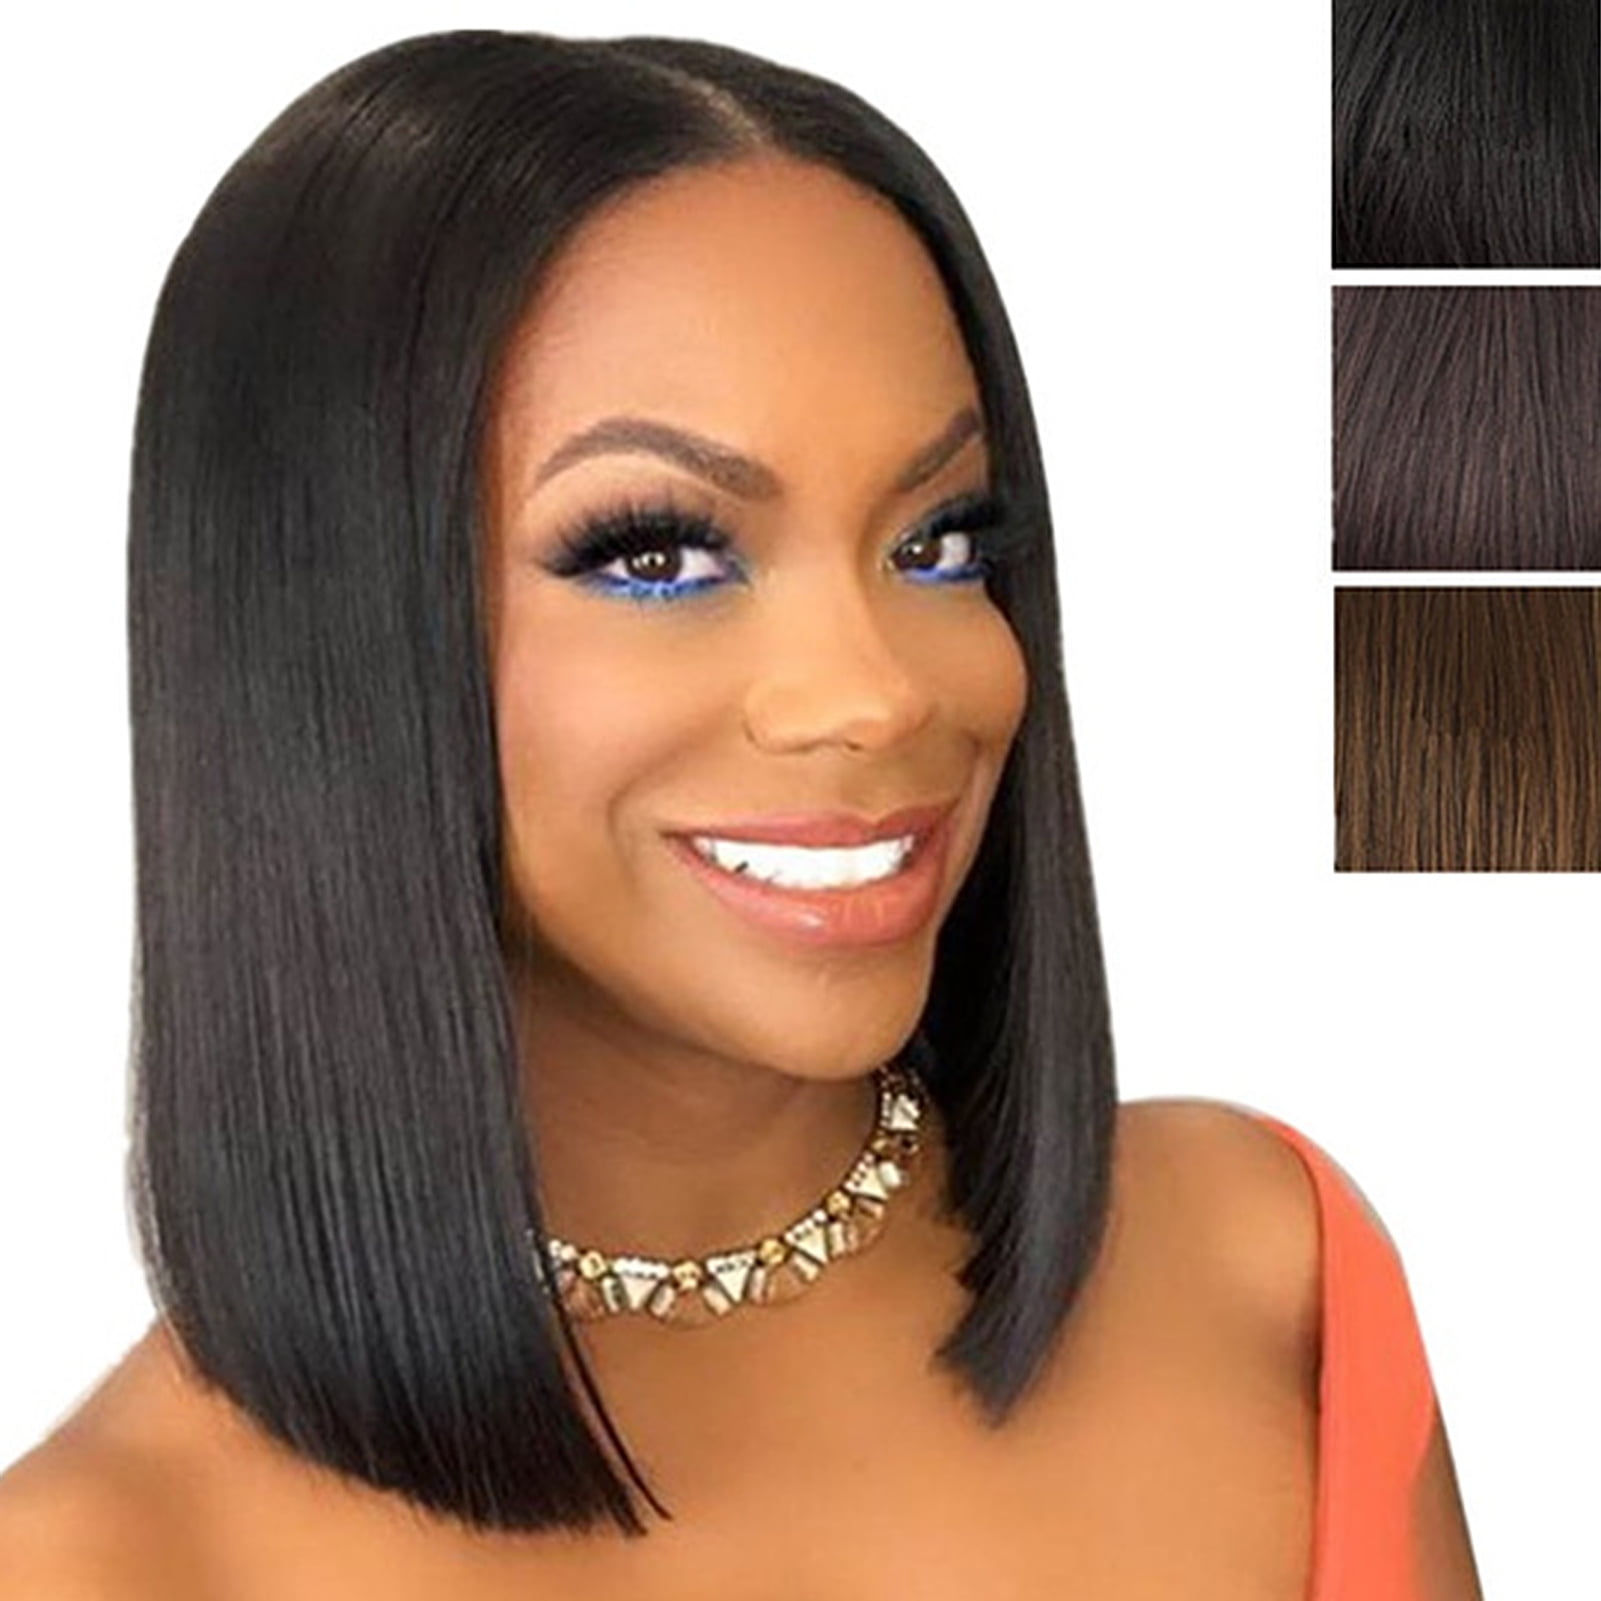 20 Inch/50 Cm Long Layered With Bangs Straight Synthetic Fiber Shoulder  Length Hair For Daily Use Or Party Wig (ash Blonde)